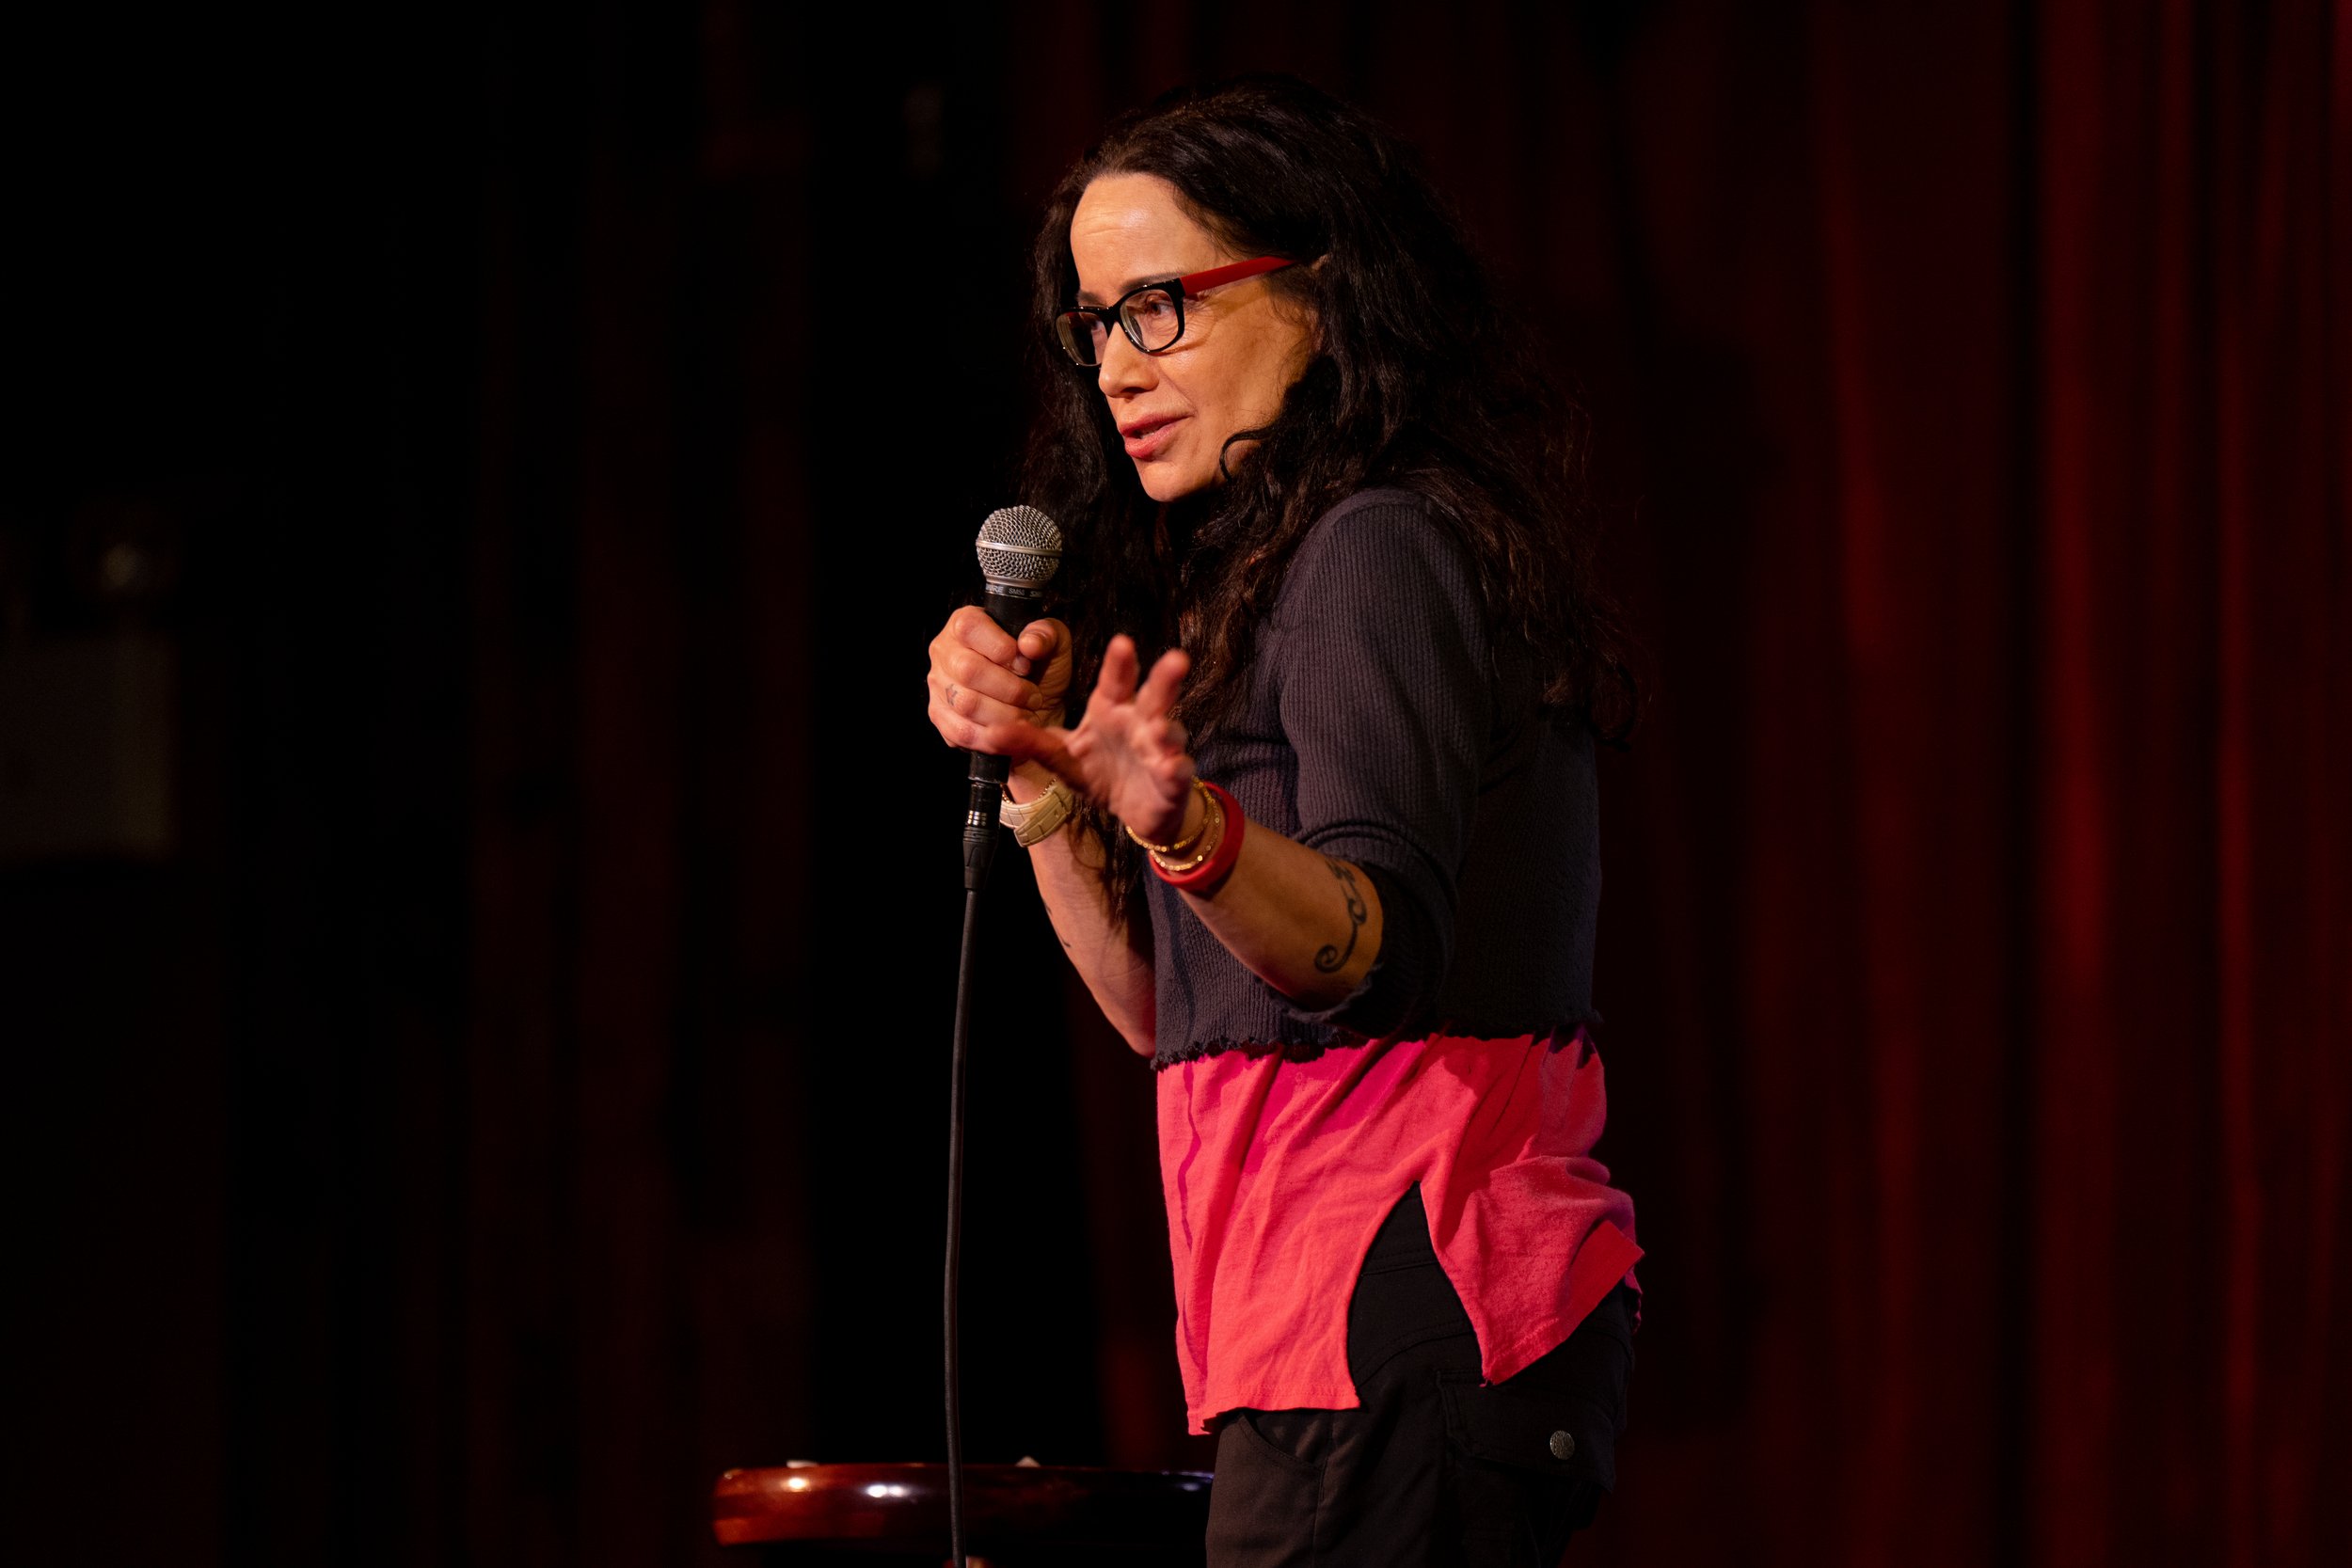  Actress and comedian Janeane Garofalo   performing on stage at The Bell House in Brooklyn, NY.  